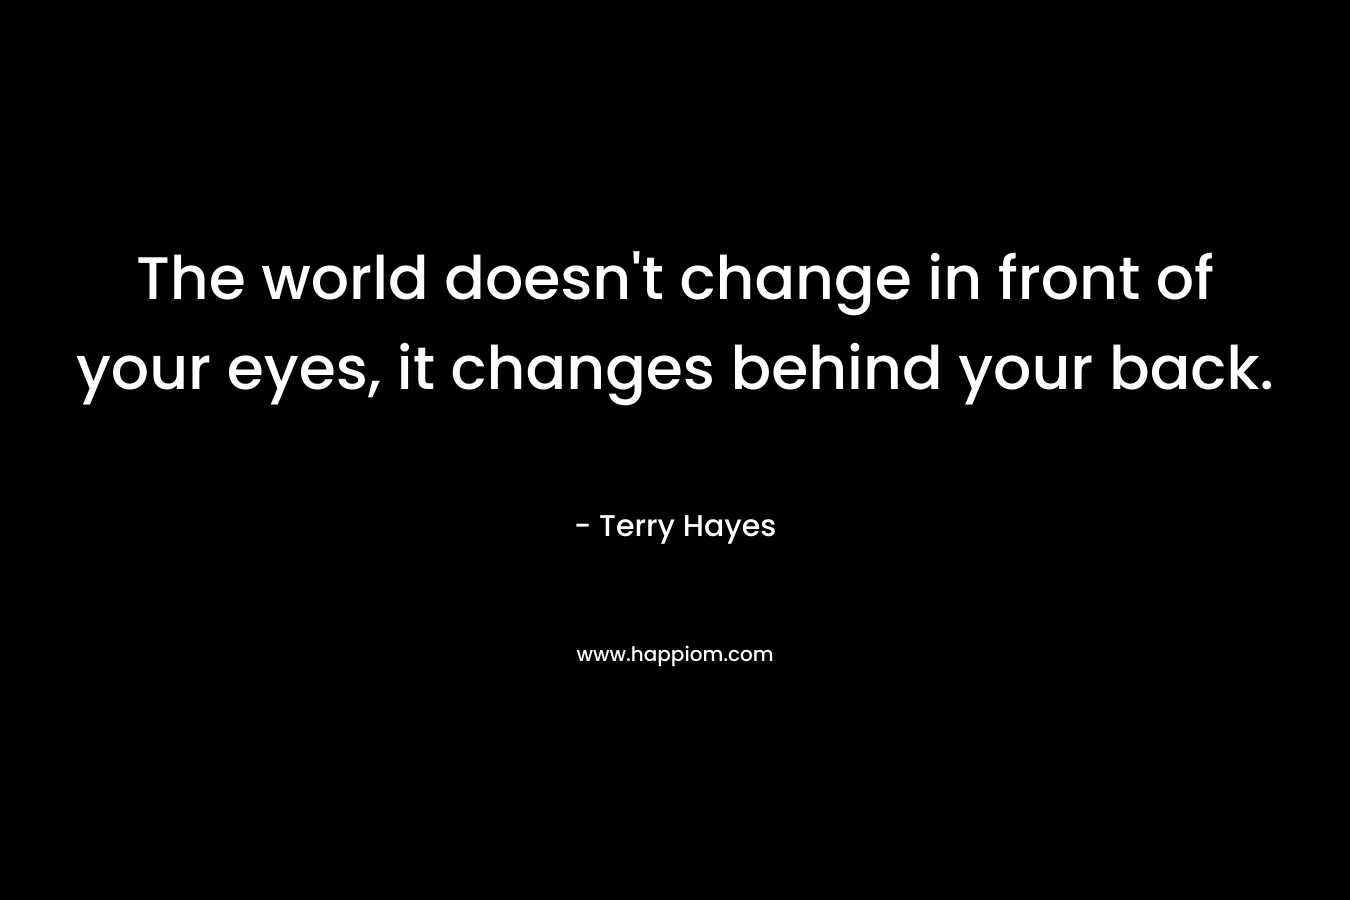 The world doesn’t change in front of your eyes, it changes behind your back. – Terry Hayes